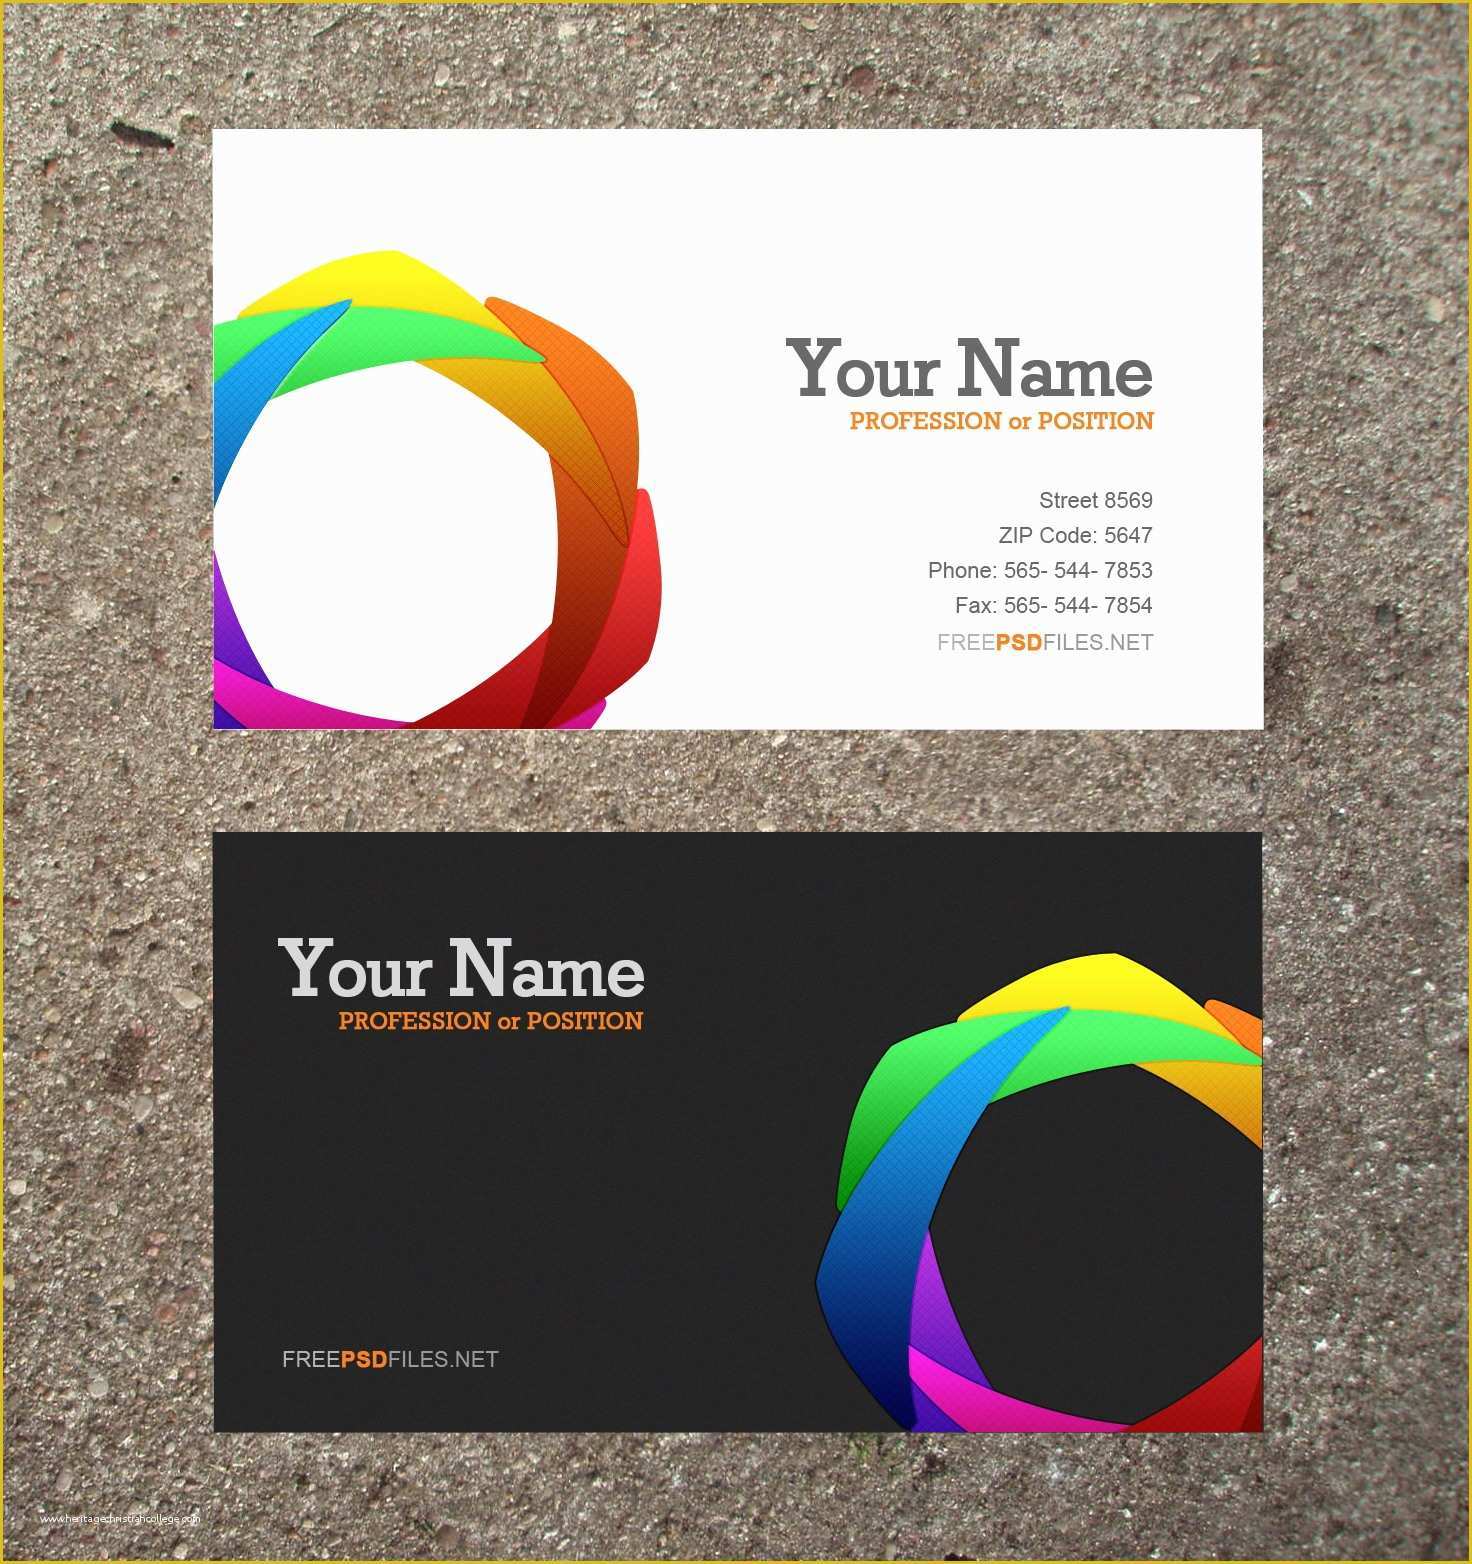 Photo Business Cards Templates Free Of 20 Free Psd Business Card Templates Free Business